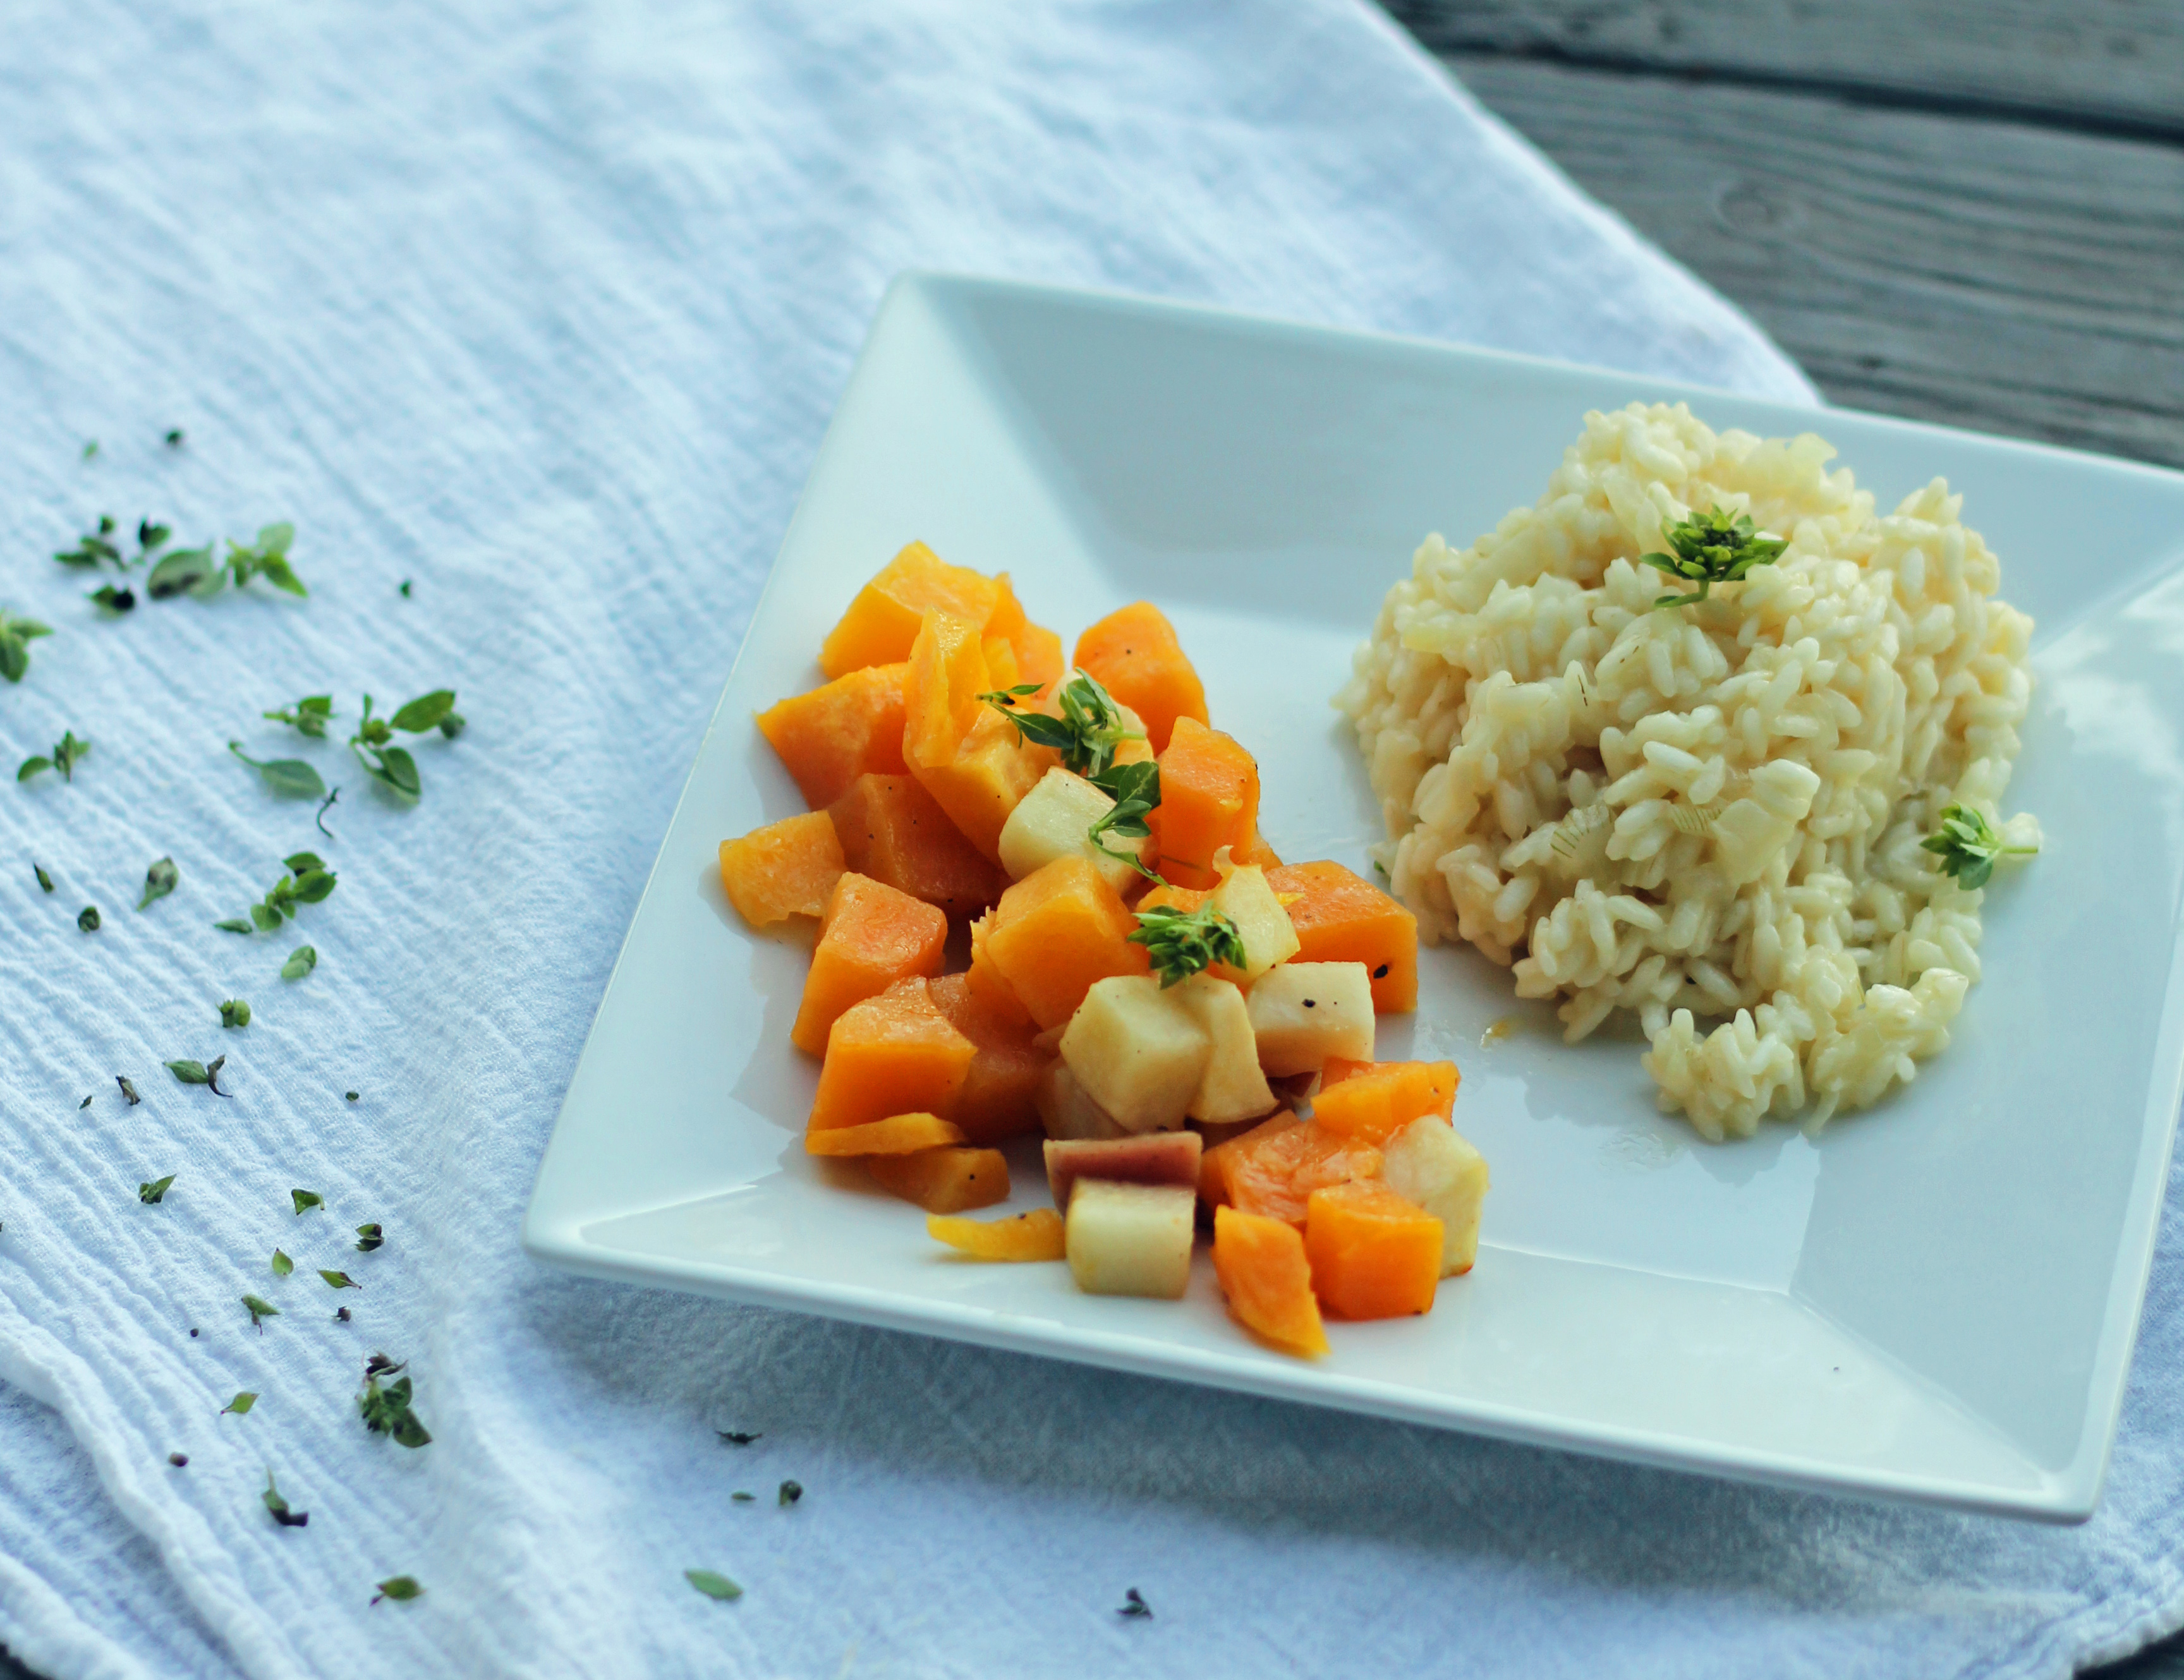 Roasted Butternut squash apples risotto | carmelmoments.com